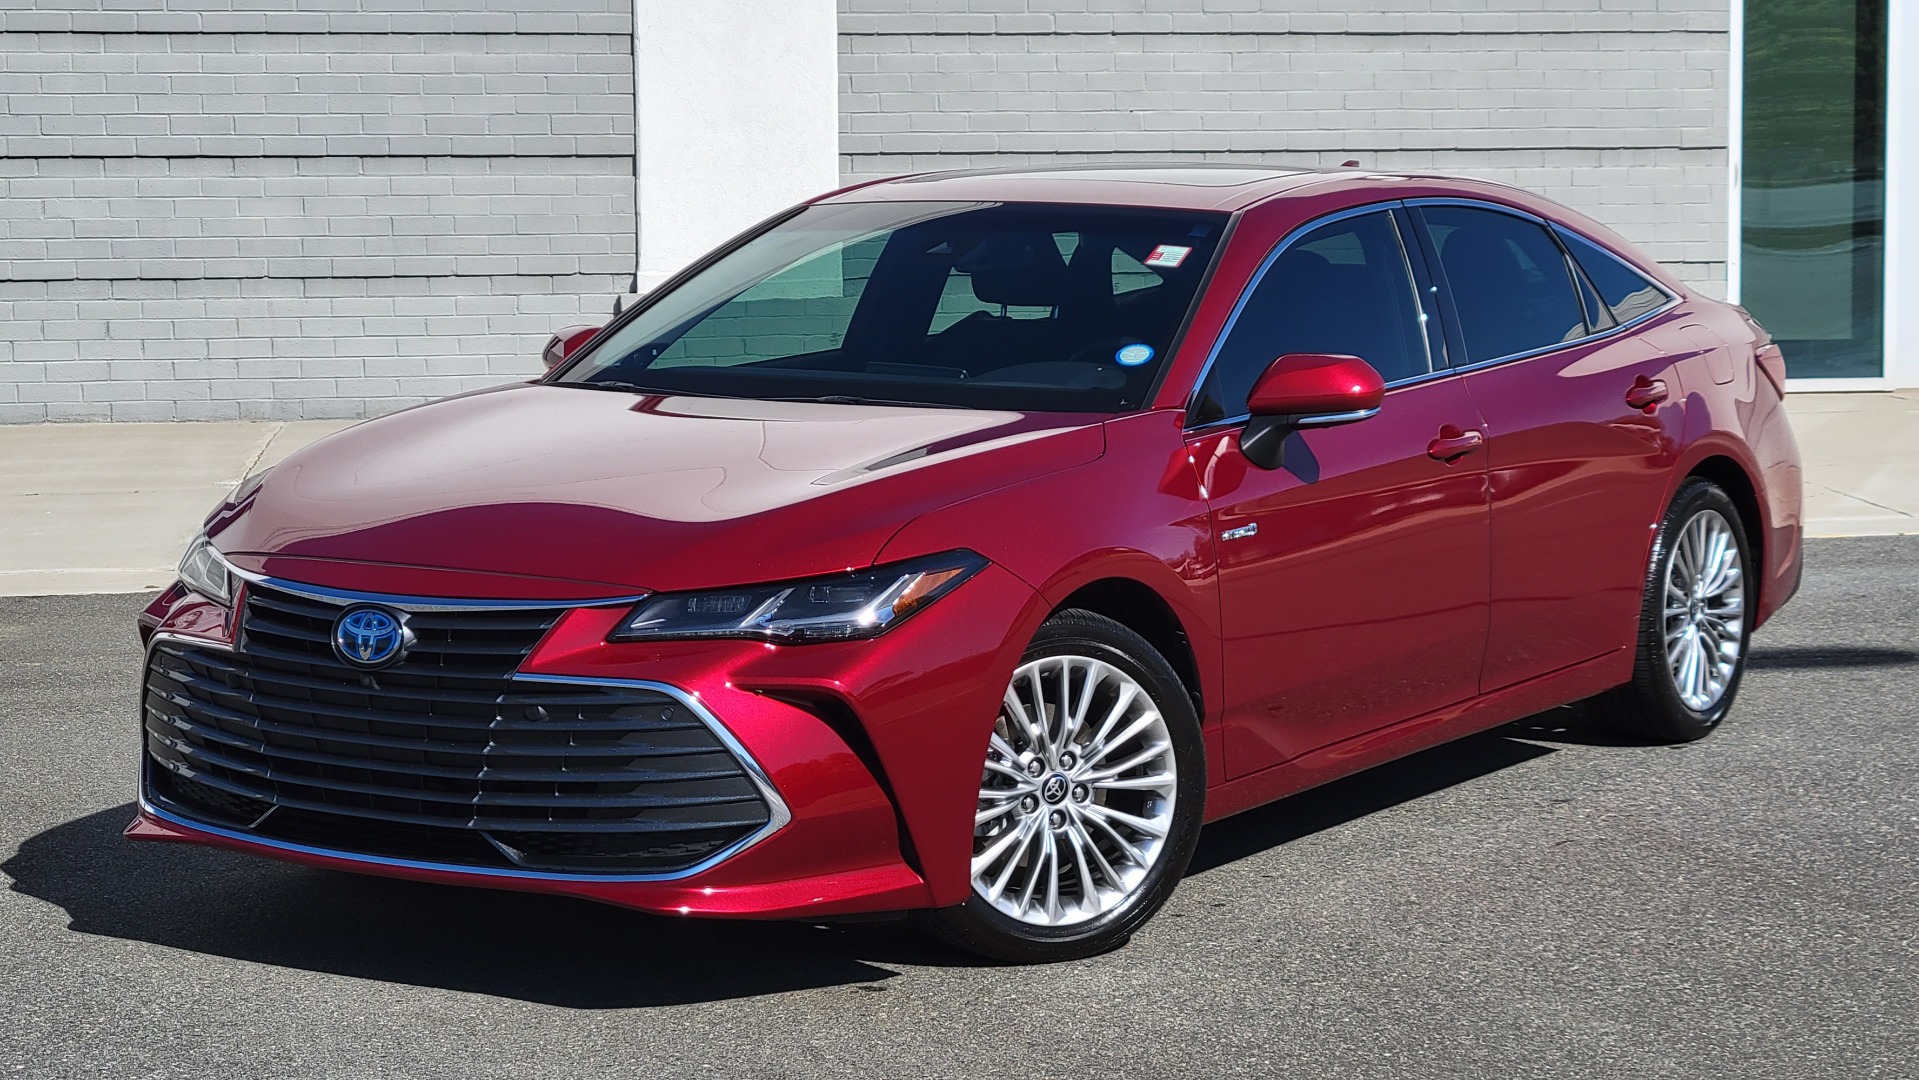 Used 2021 Toyota AVALON HYBRID LIMITED 2.5L SEDAN / NAV / SUNROOF / JBL SND / REARVIEW for sale $43,900 at Formula Imports in Charlotte NC 28227 1